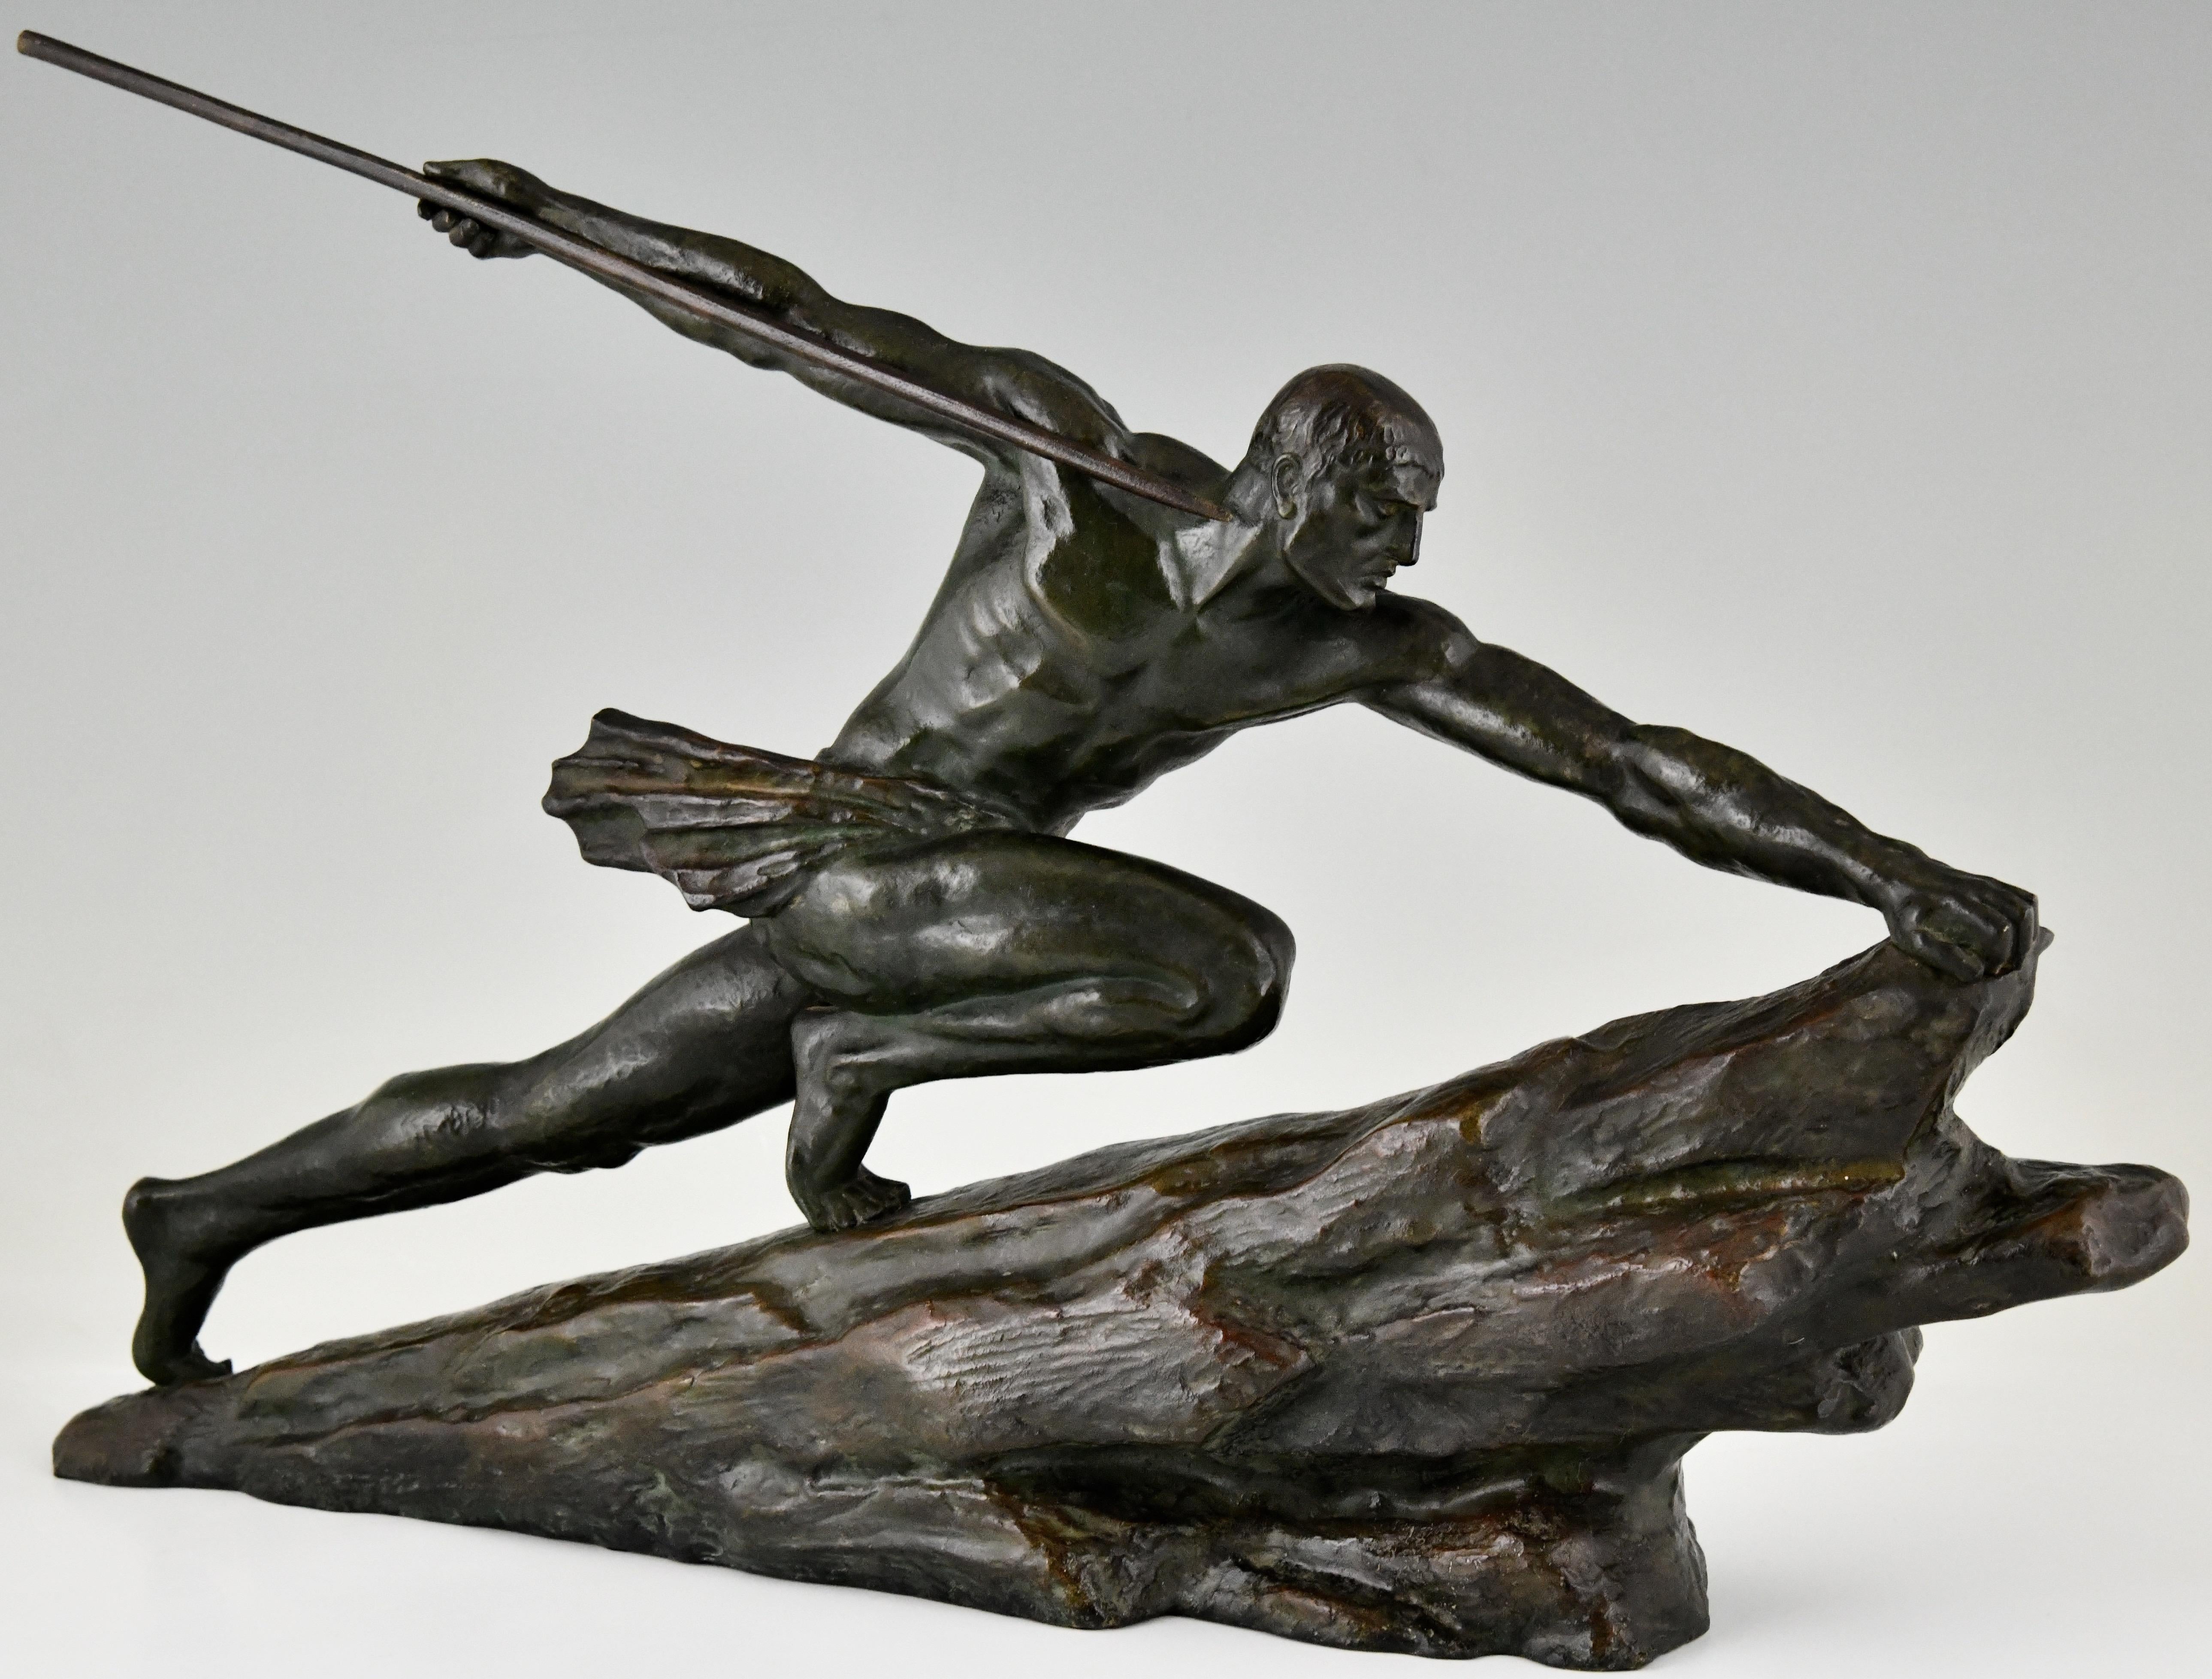 Art Deco bronze sculpture athlete with spear signed by Pierre Le Faguays. 
The sculpture has a rich green patina with shades of brown.
France 1927.
This bronze is illustrated on page 425 of the book: Bronzes, sculptors and founders by H. Berman,